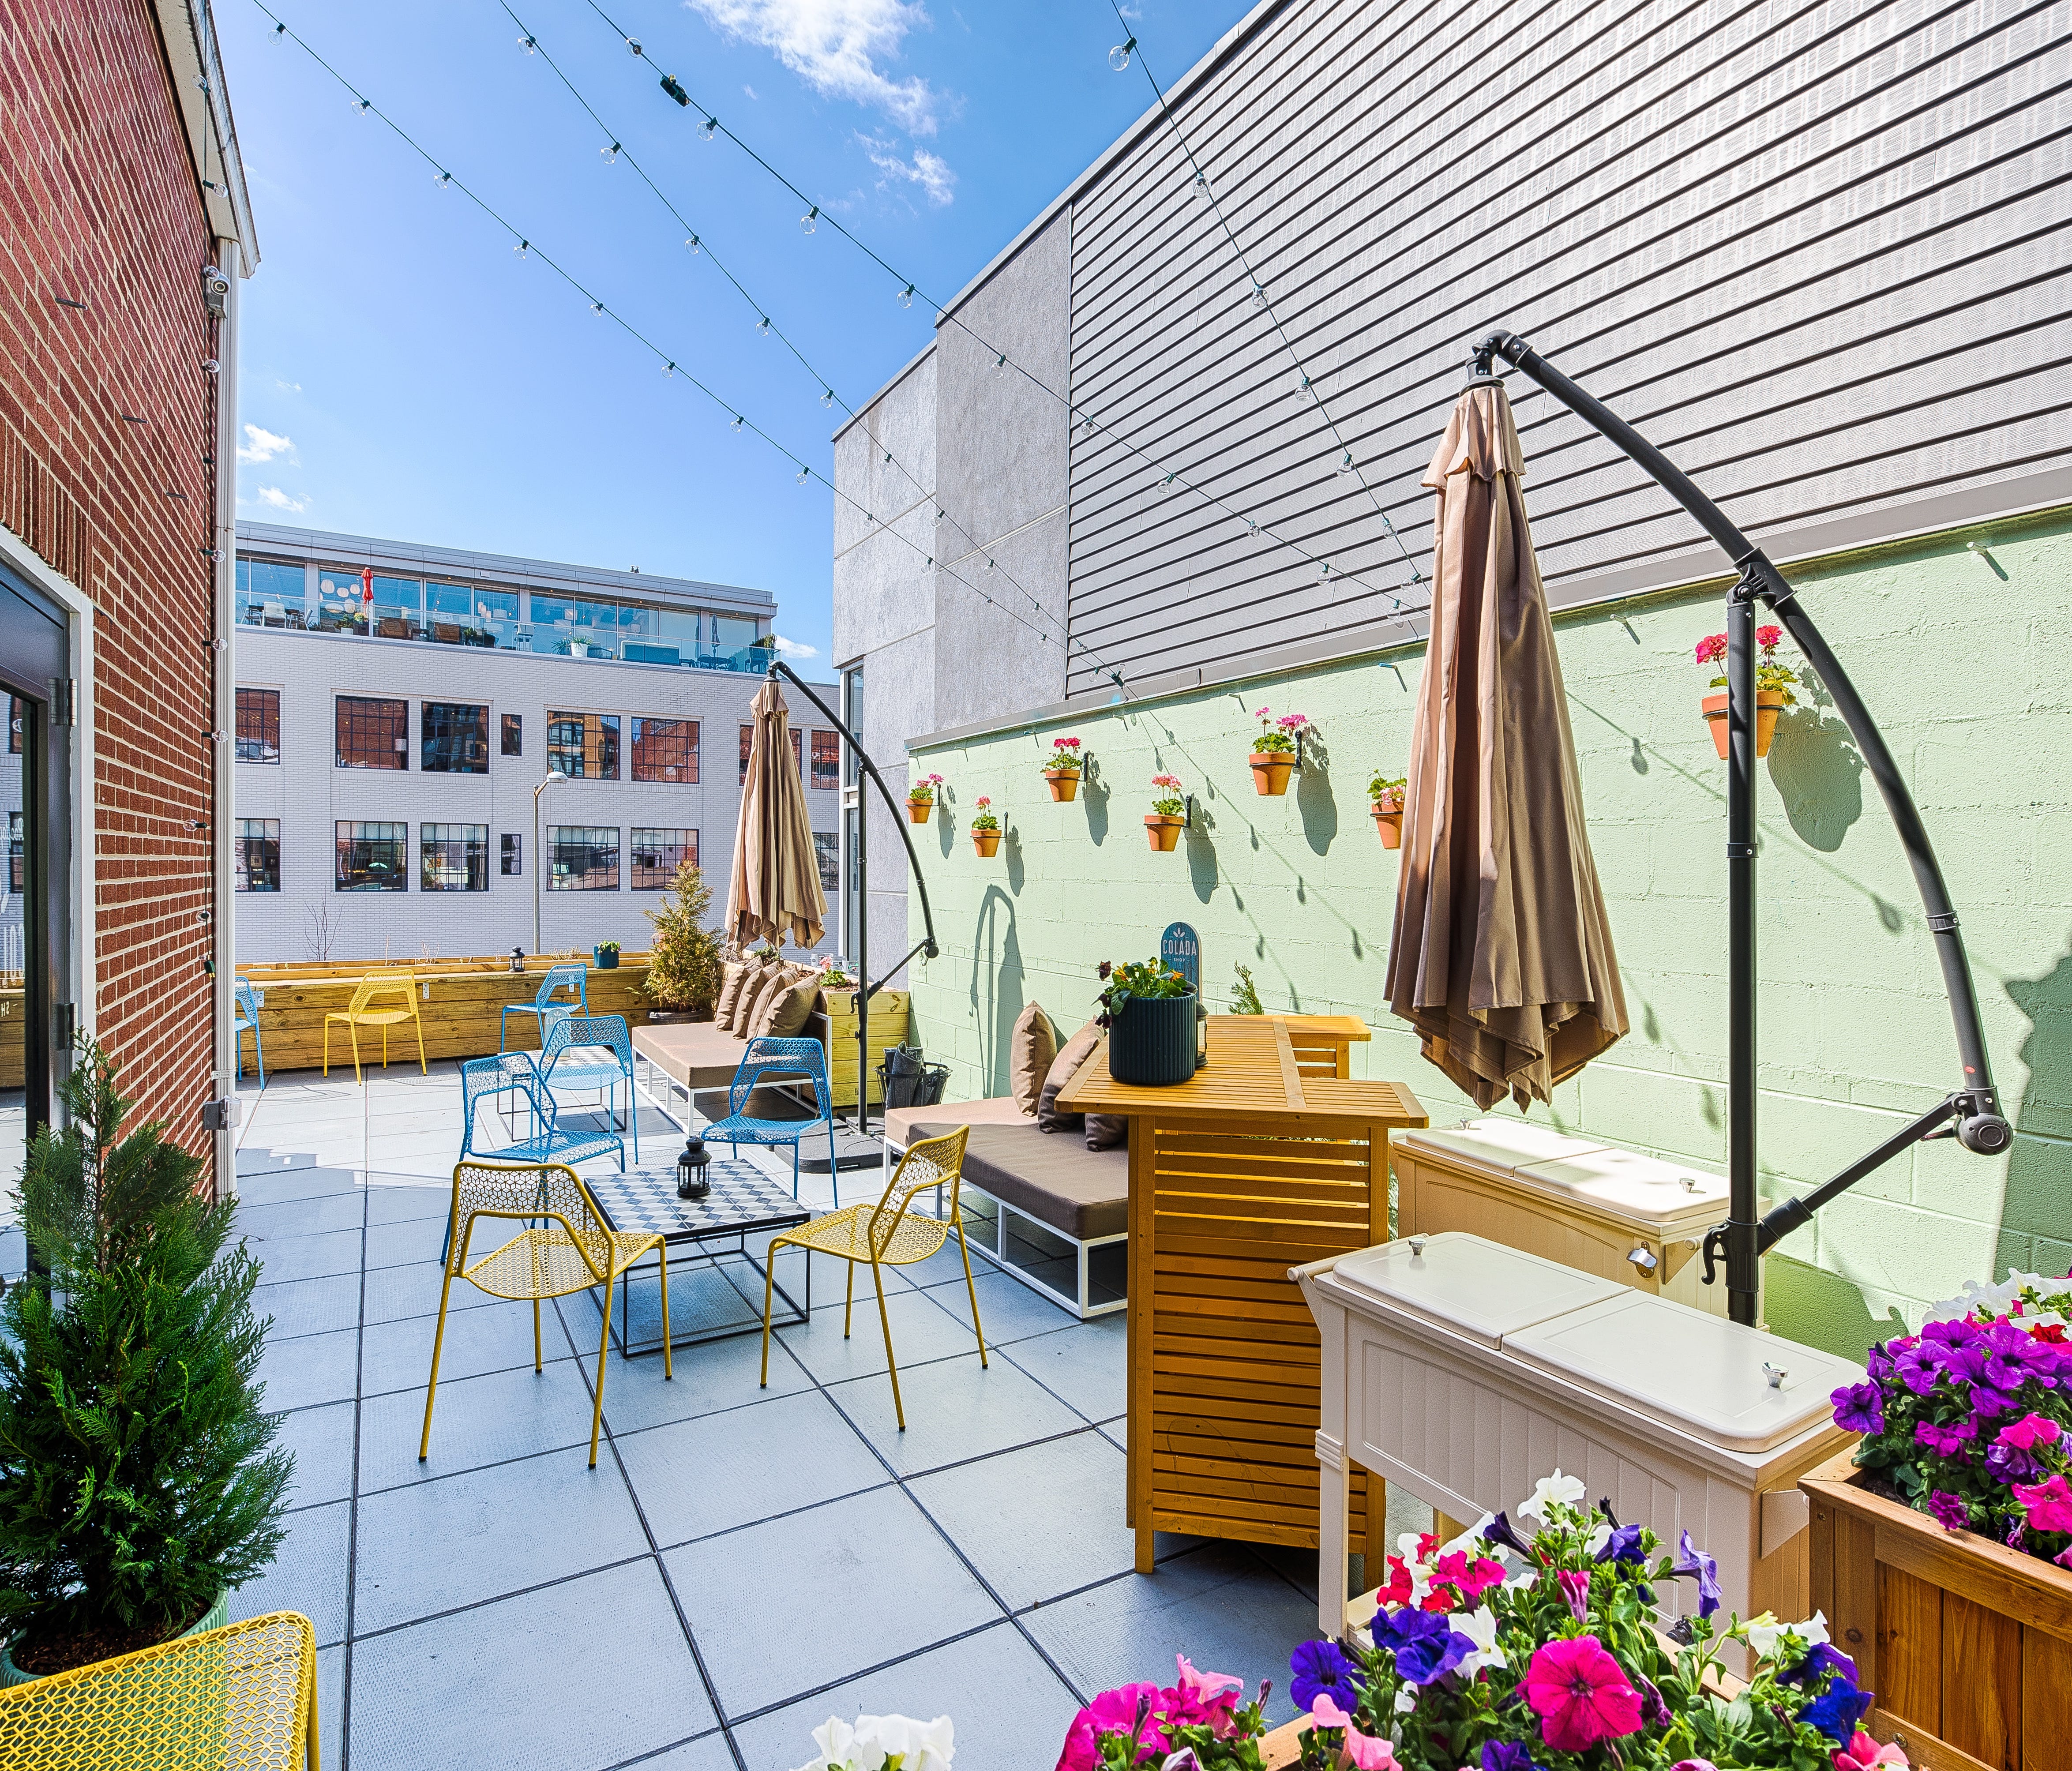 Washington, D.C.'s Colada Shop opened its rooftop garden in April. The Cuban coffee and snack eatery will serve pouched cocktails, mojitos, pineapple sparkling sangria and more with its croquetas, empanadas and pastelitos.